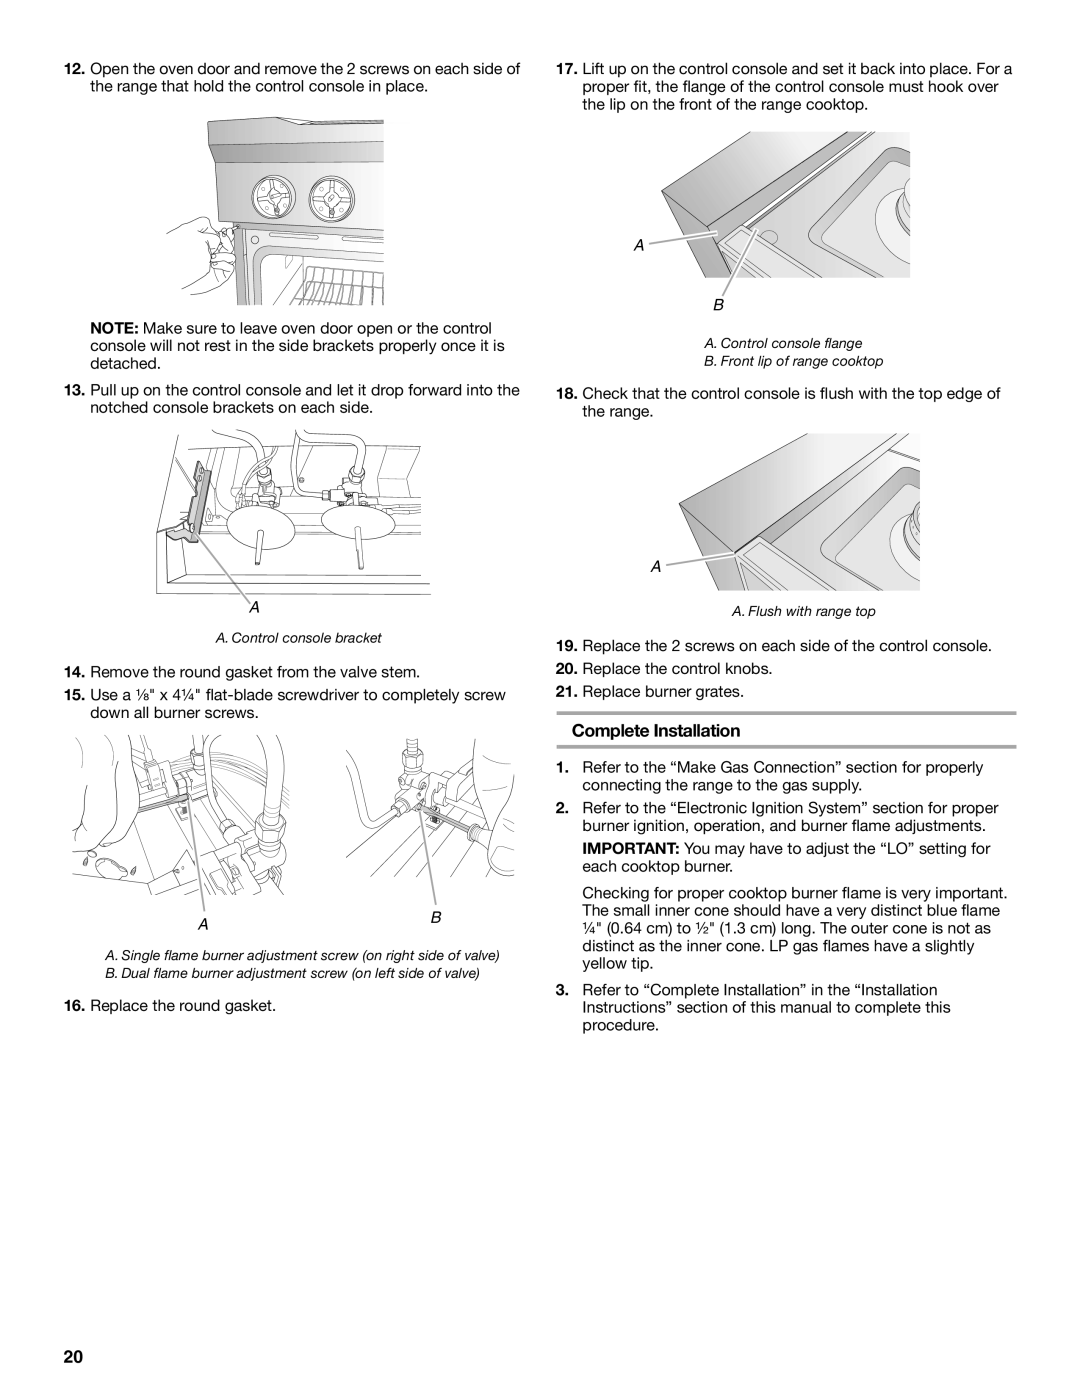 Jenn-Air W10394575A installation instructions Complete Installation 